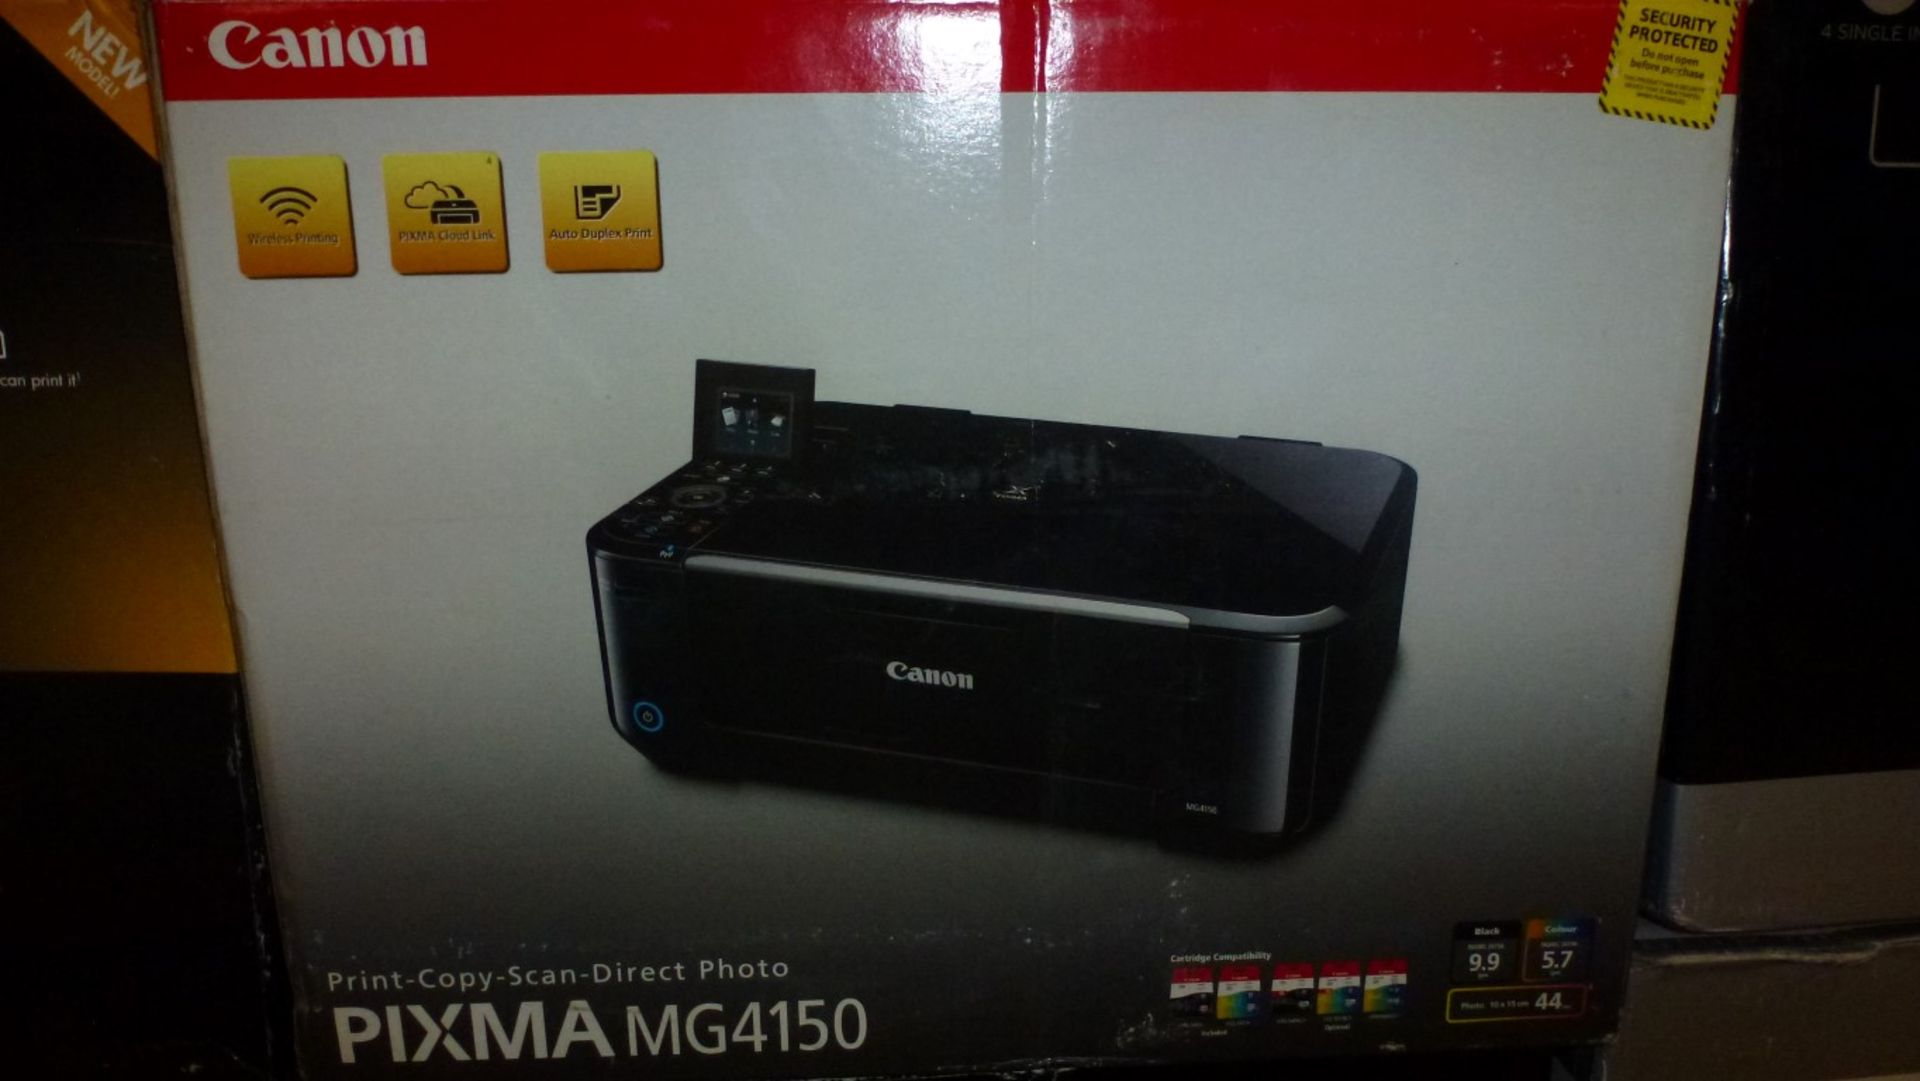 8 x Various Printers - Models Include Epson Stylus SX535WD, HP Deskjet 3070A, HP Photosmart 5510, - Image 15 of 18